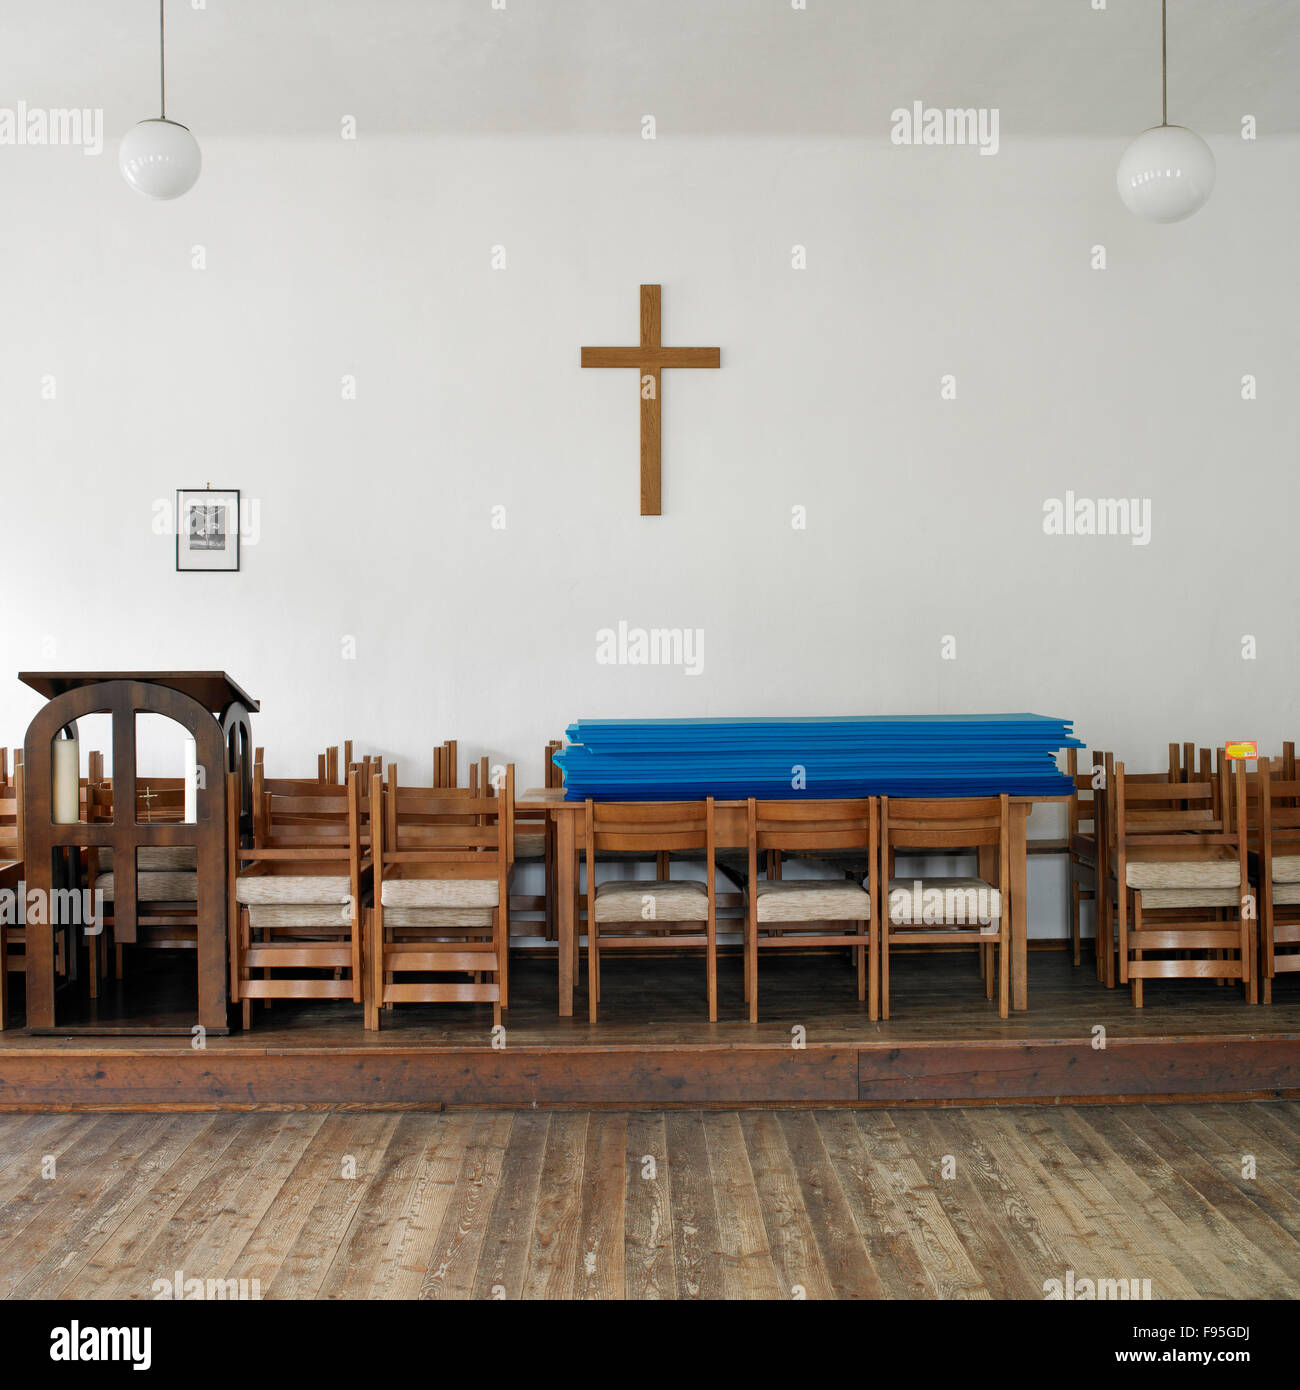 View of the interior of a church in Austria. Wood cross hanging on the wall and stacks of chairs in view. Stock Photo